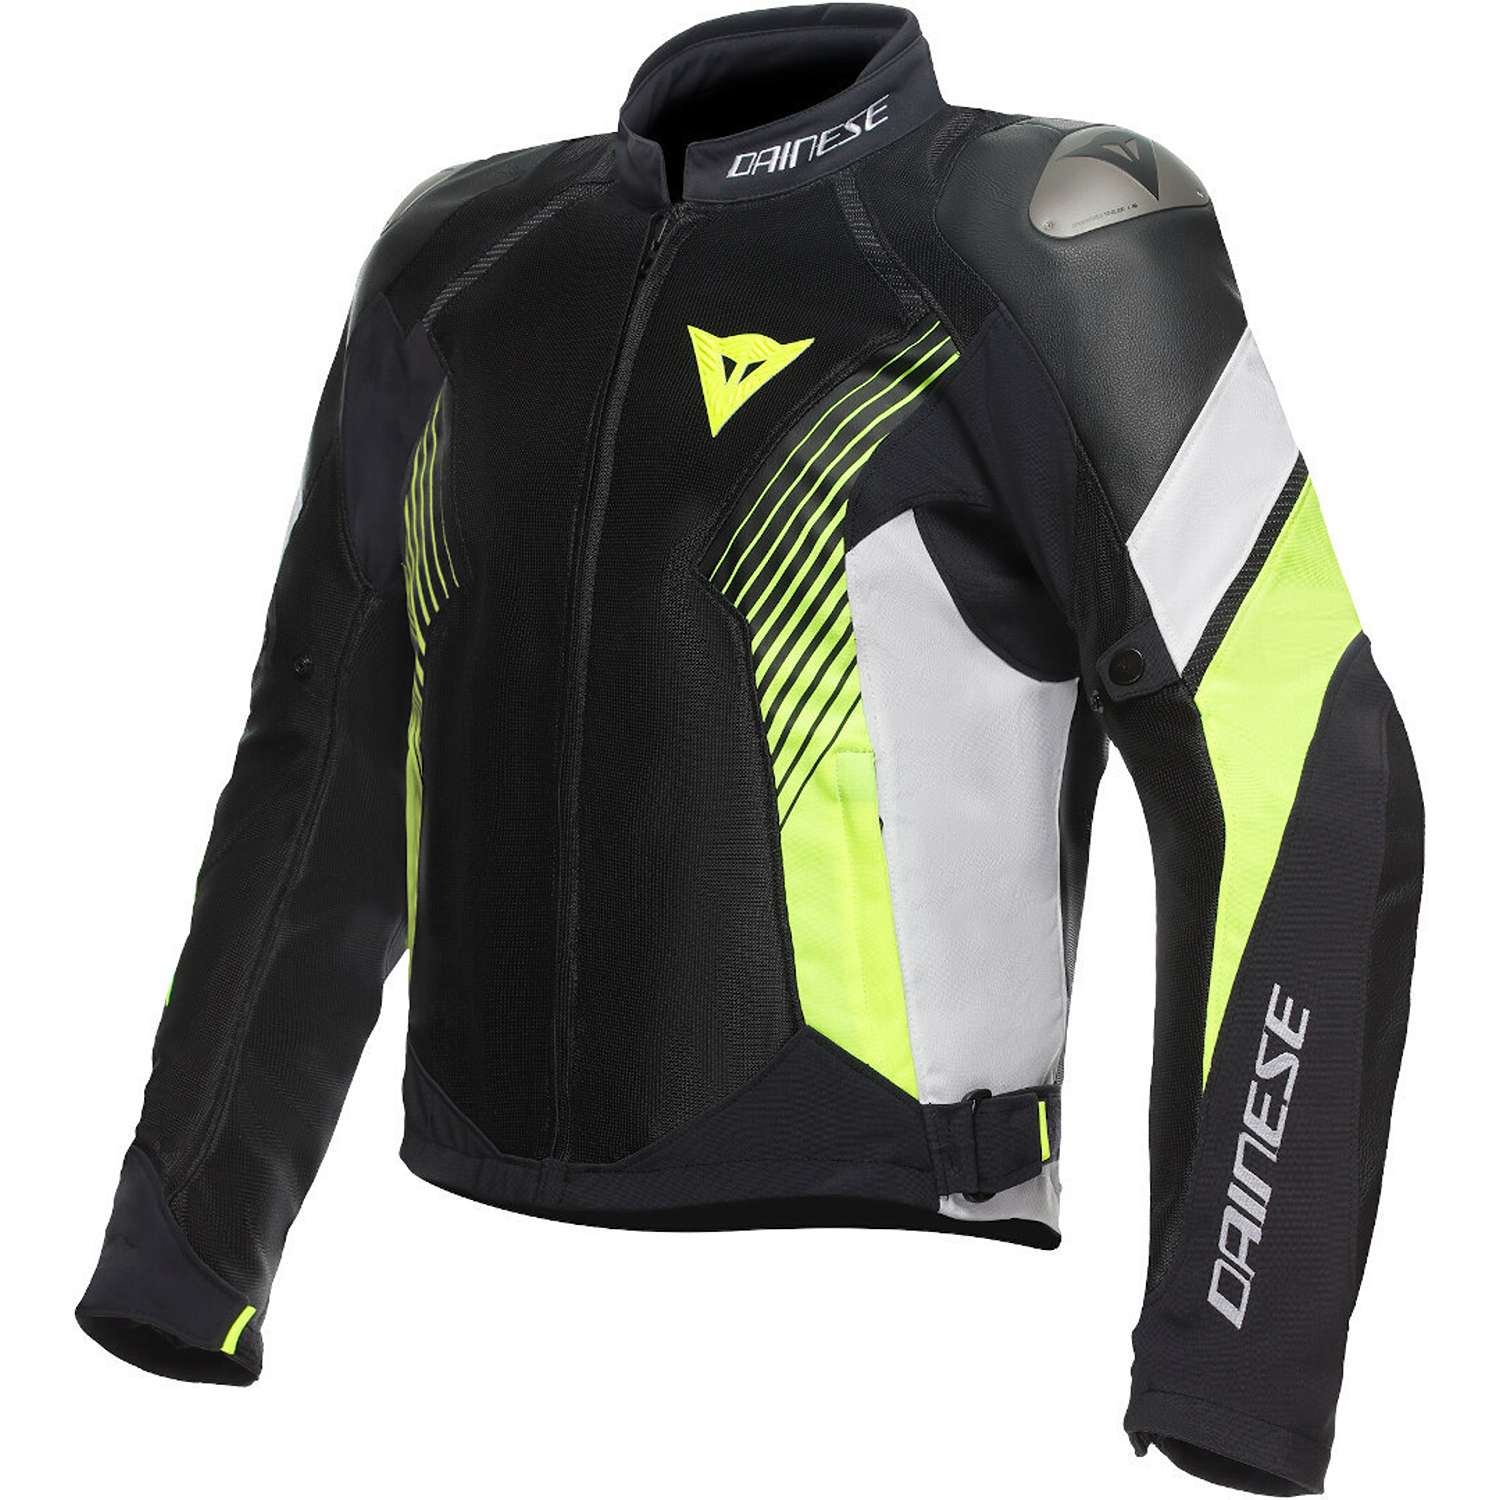 Image of Dainese Super Rider 2 Absoluteshell Jacket Black White Fluo Yellow Talla 54